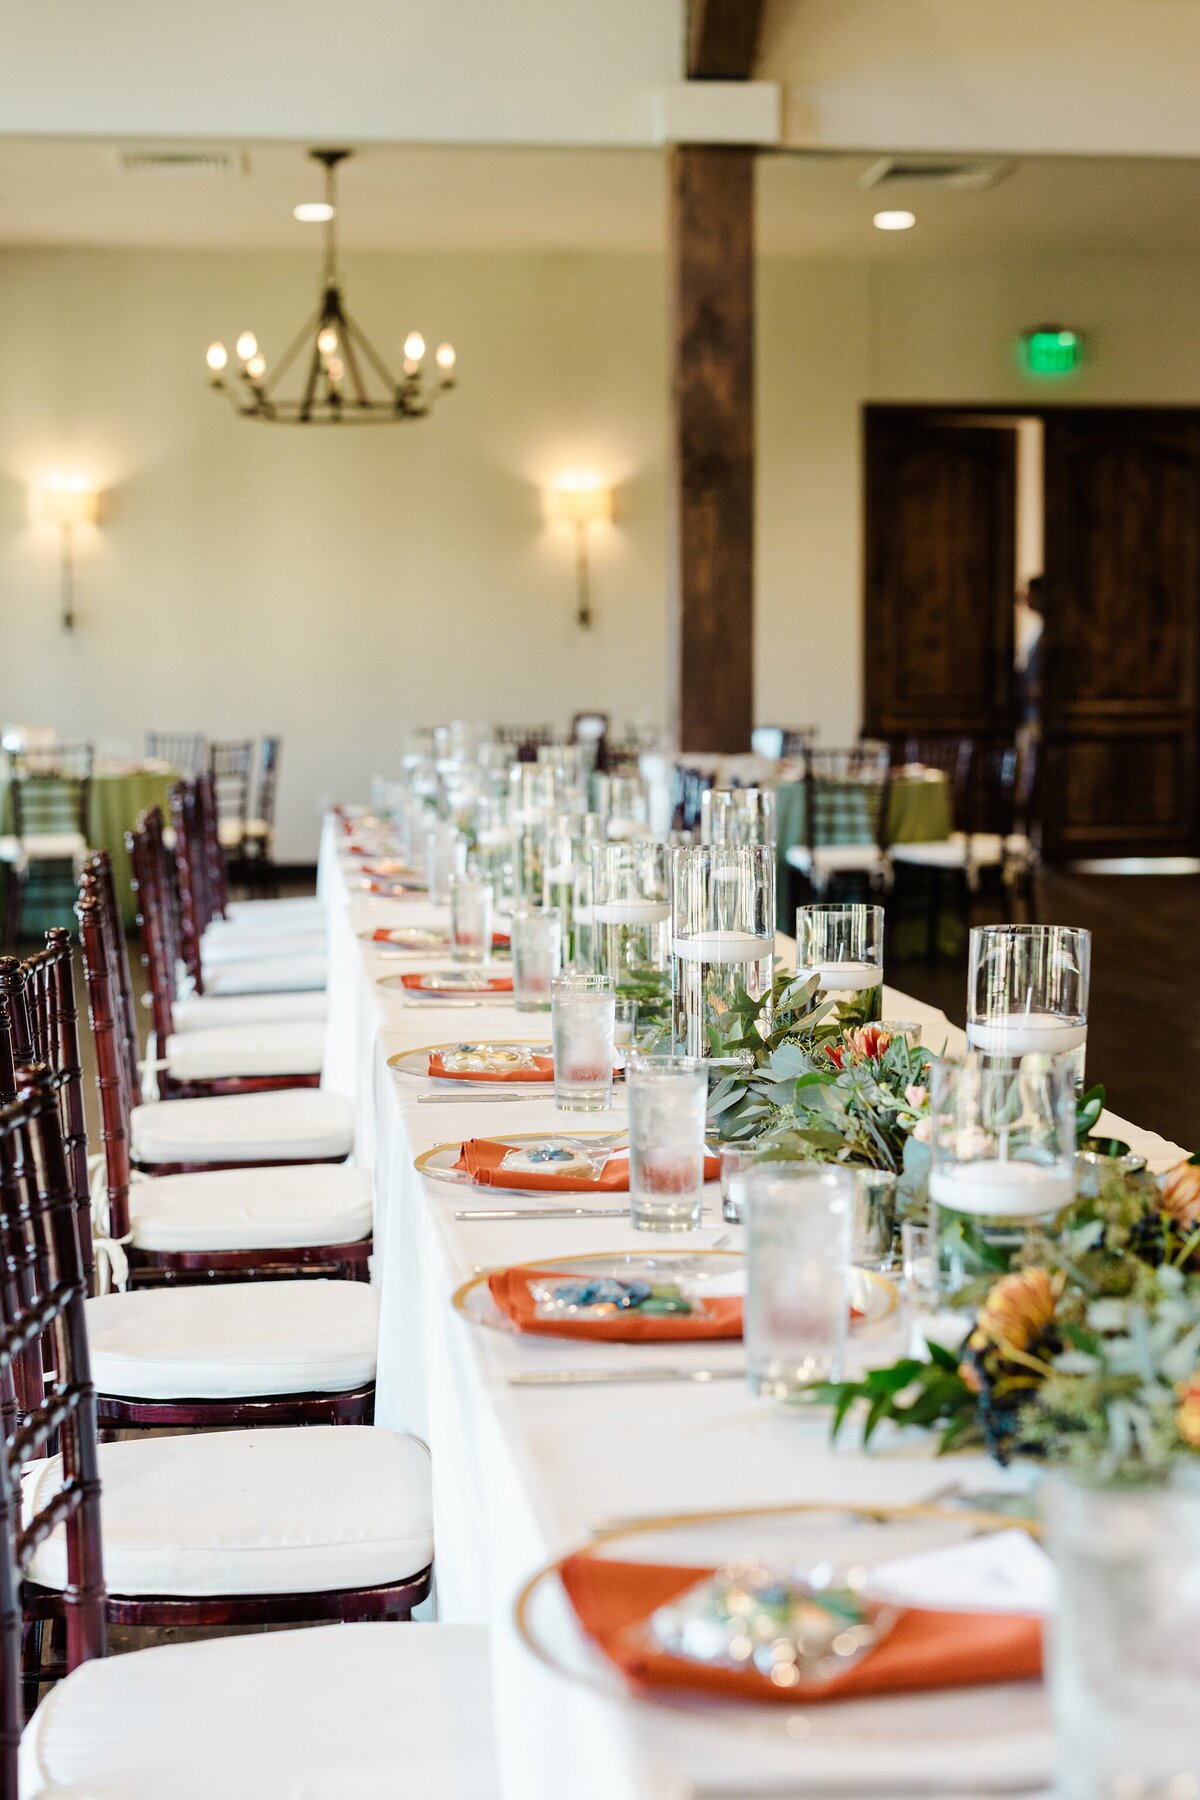 A detail shot of a head table at a wedding reception at the Laurel in Grapevine, Texas. The long, rectangular table has a long white tablecloth, place setting that have cutlery, orange napkins, and custom cookies on each plate as well as many candles and lots of florals and greenery as centerpieces. Other similar circular tables can be seen in the background.